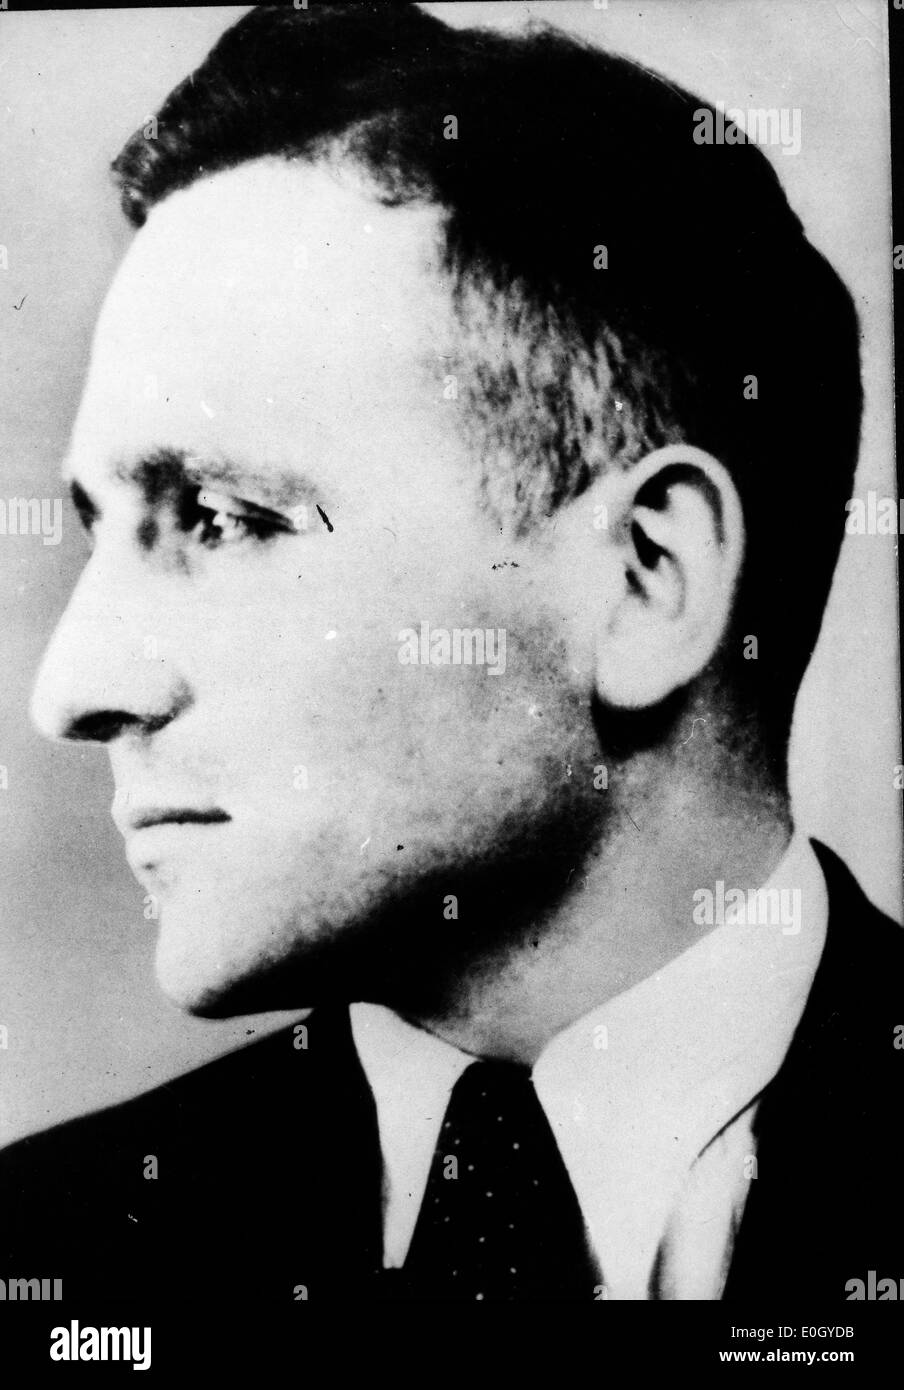 Jan. 01, 1940 - Berlin, Germany - Nazi KLAUS BARBIE, who from 1942-1944 was  the German Commander in Lyon, responsible for 'crimes against humanity'  including deportation of French Jews to death camps,